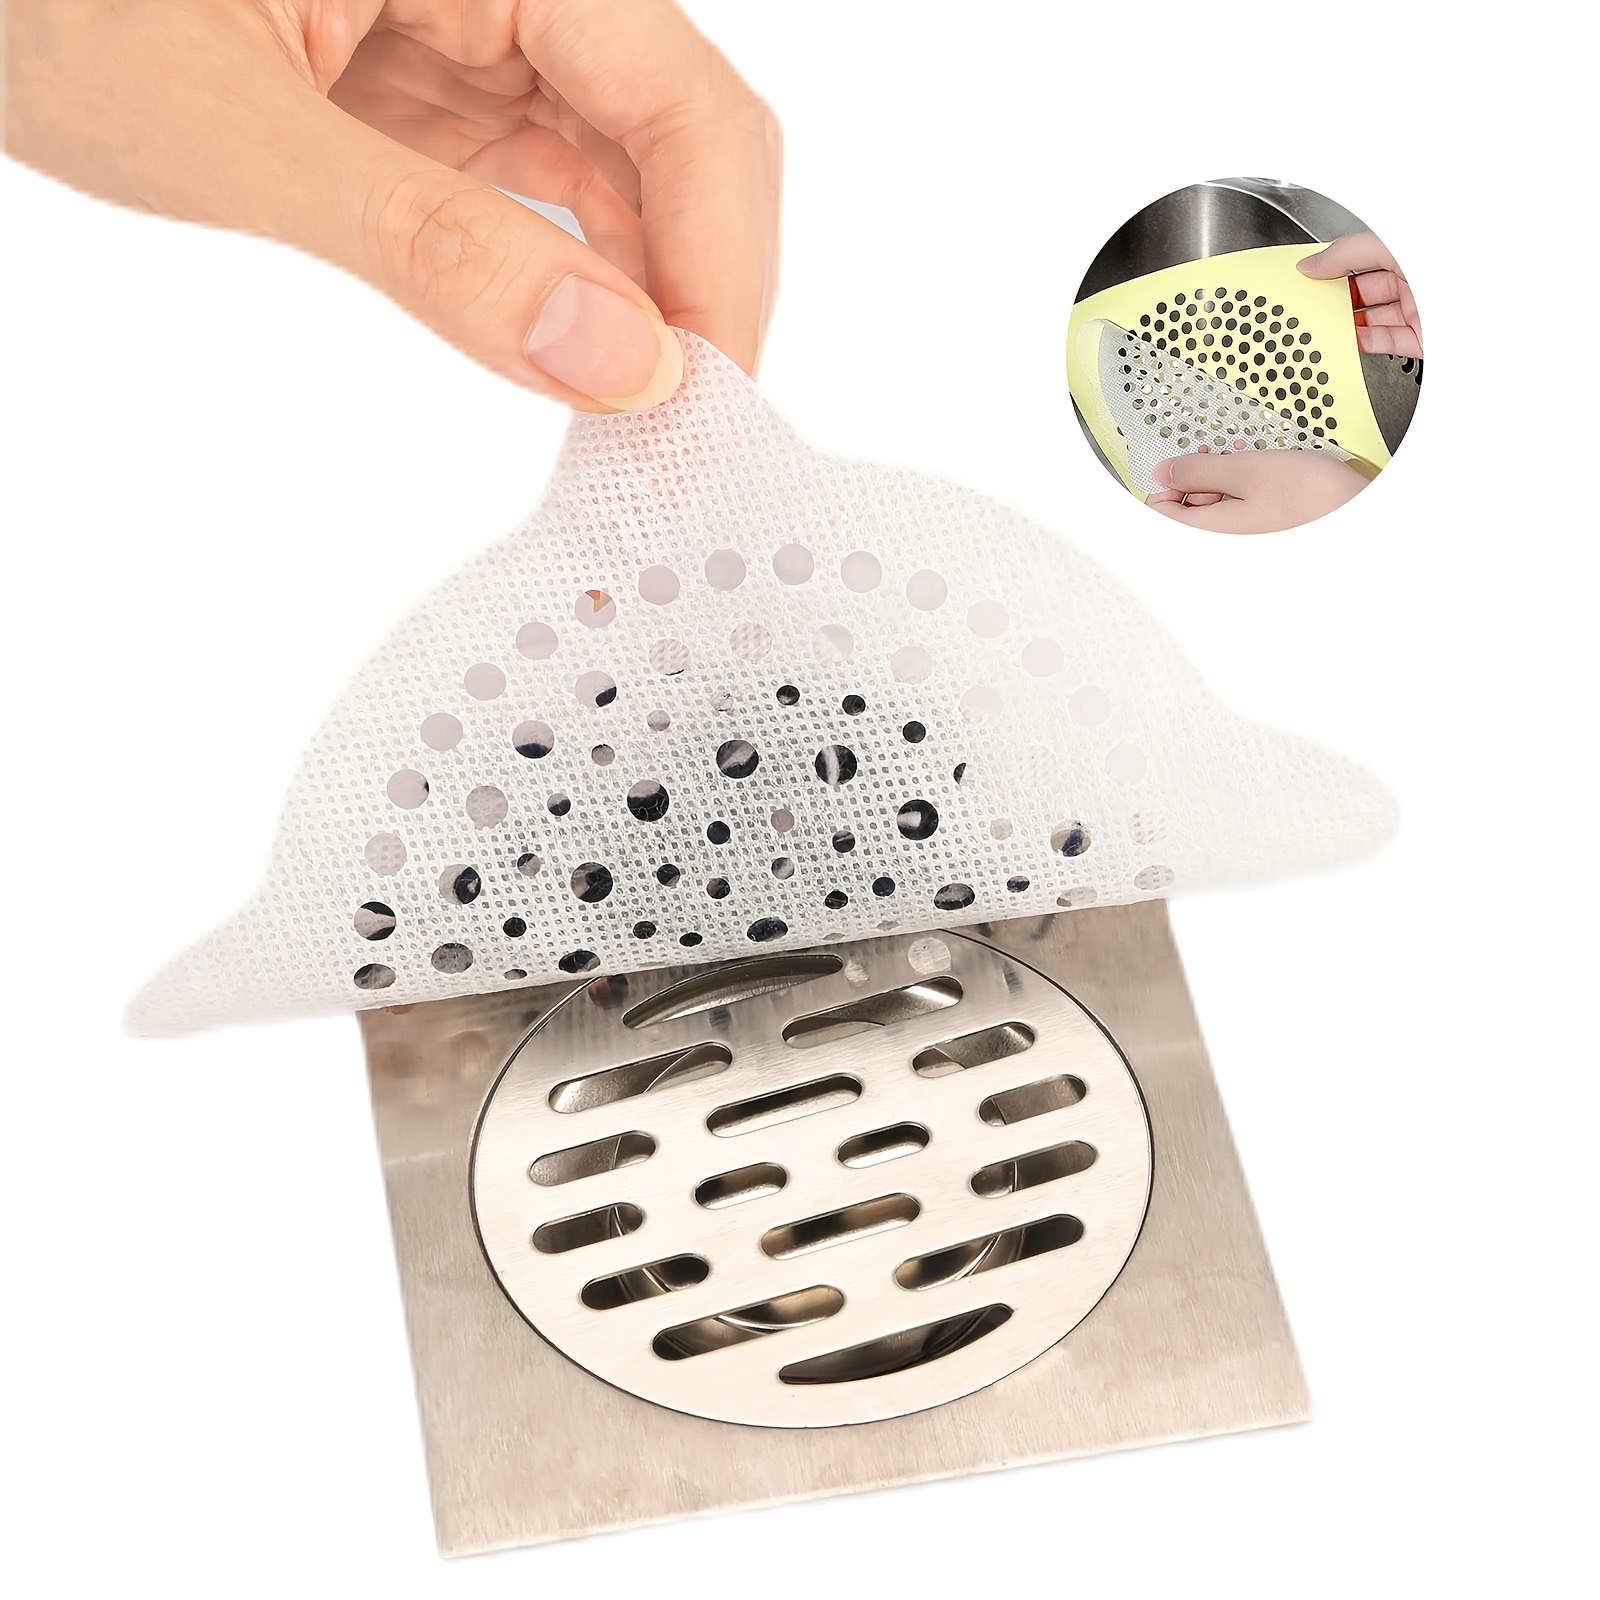 Disposable Drain Hair Catcher Stickers for Shower, White Mesh Stickers  4.3'', 25 PCS, Sticky Covers, Shower Drain Protector, Anti-Blockage - Yahoo  Shopping